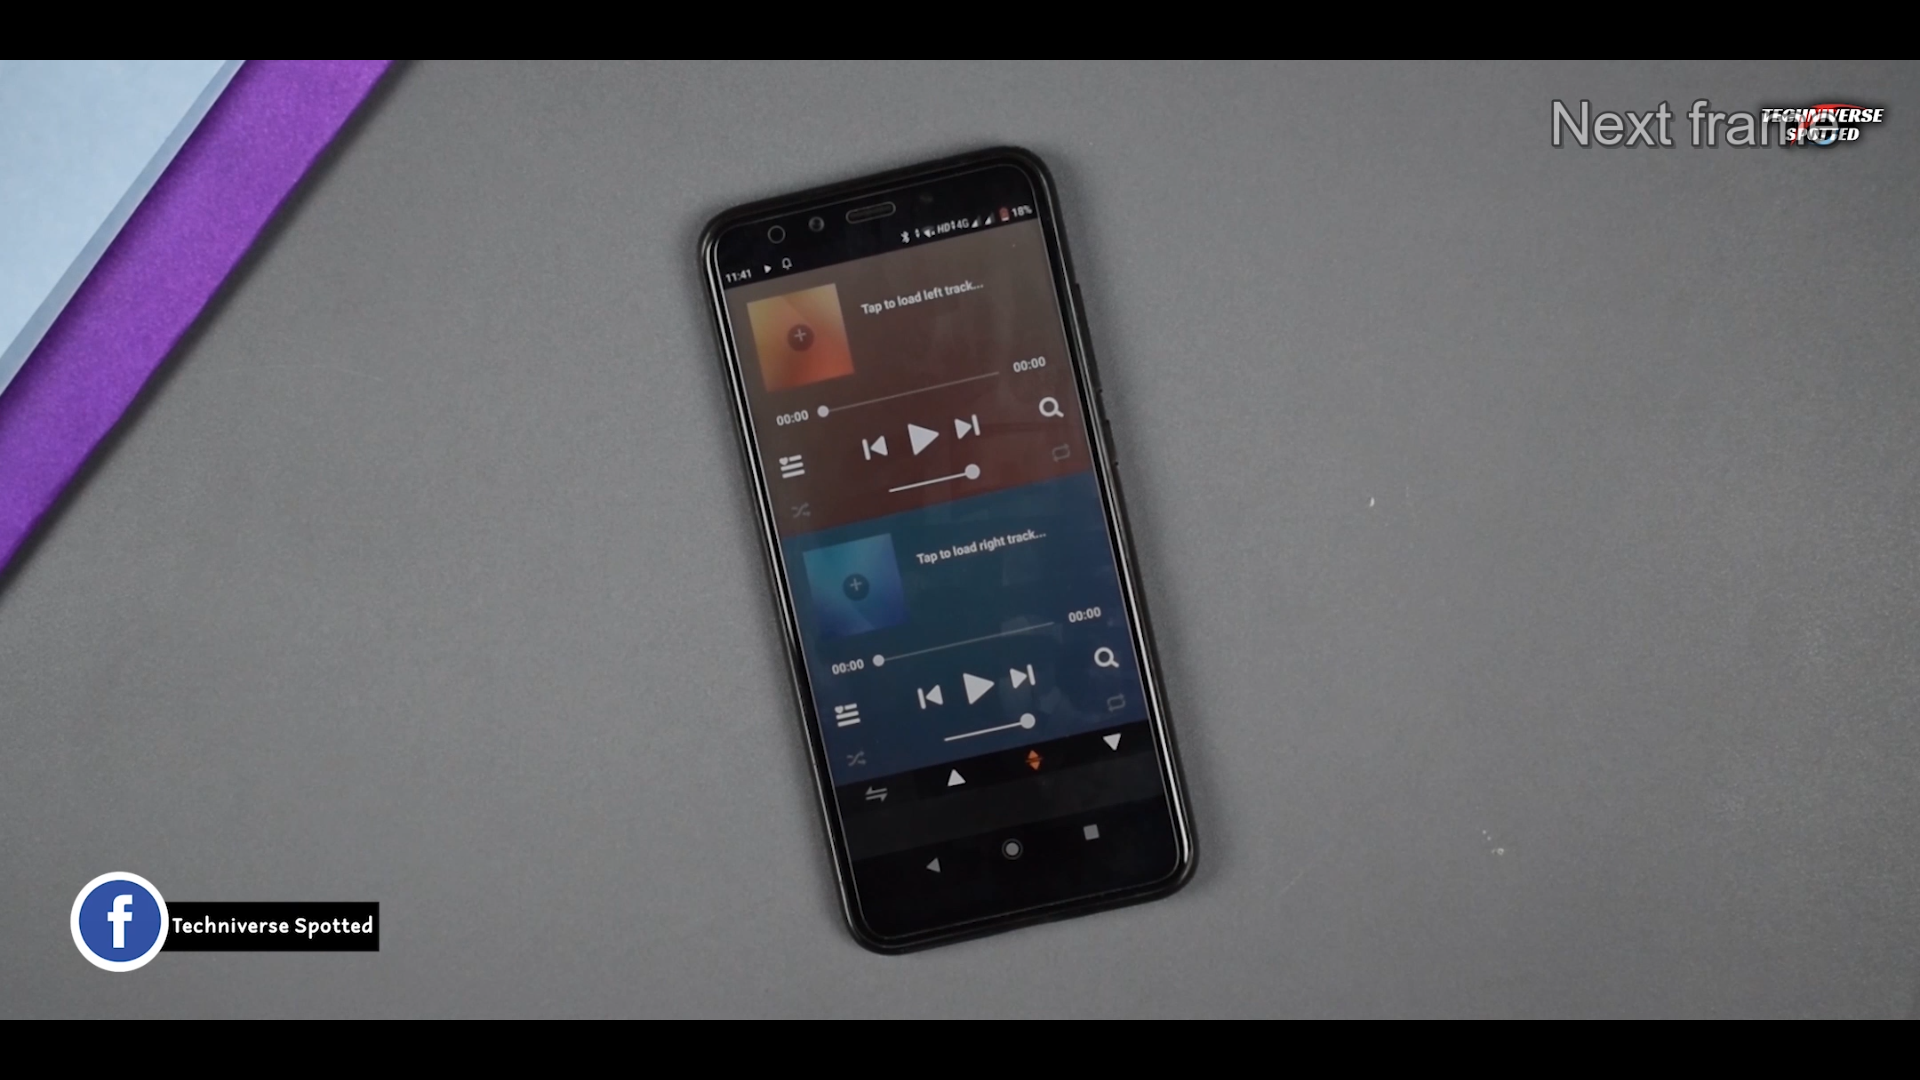 Listen to Two Different Songs at Once With SplitCloud.